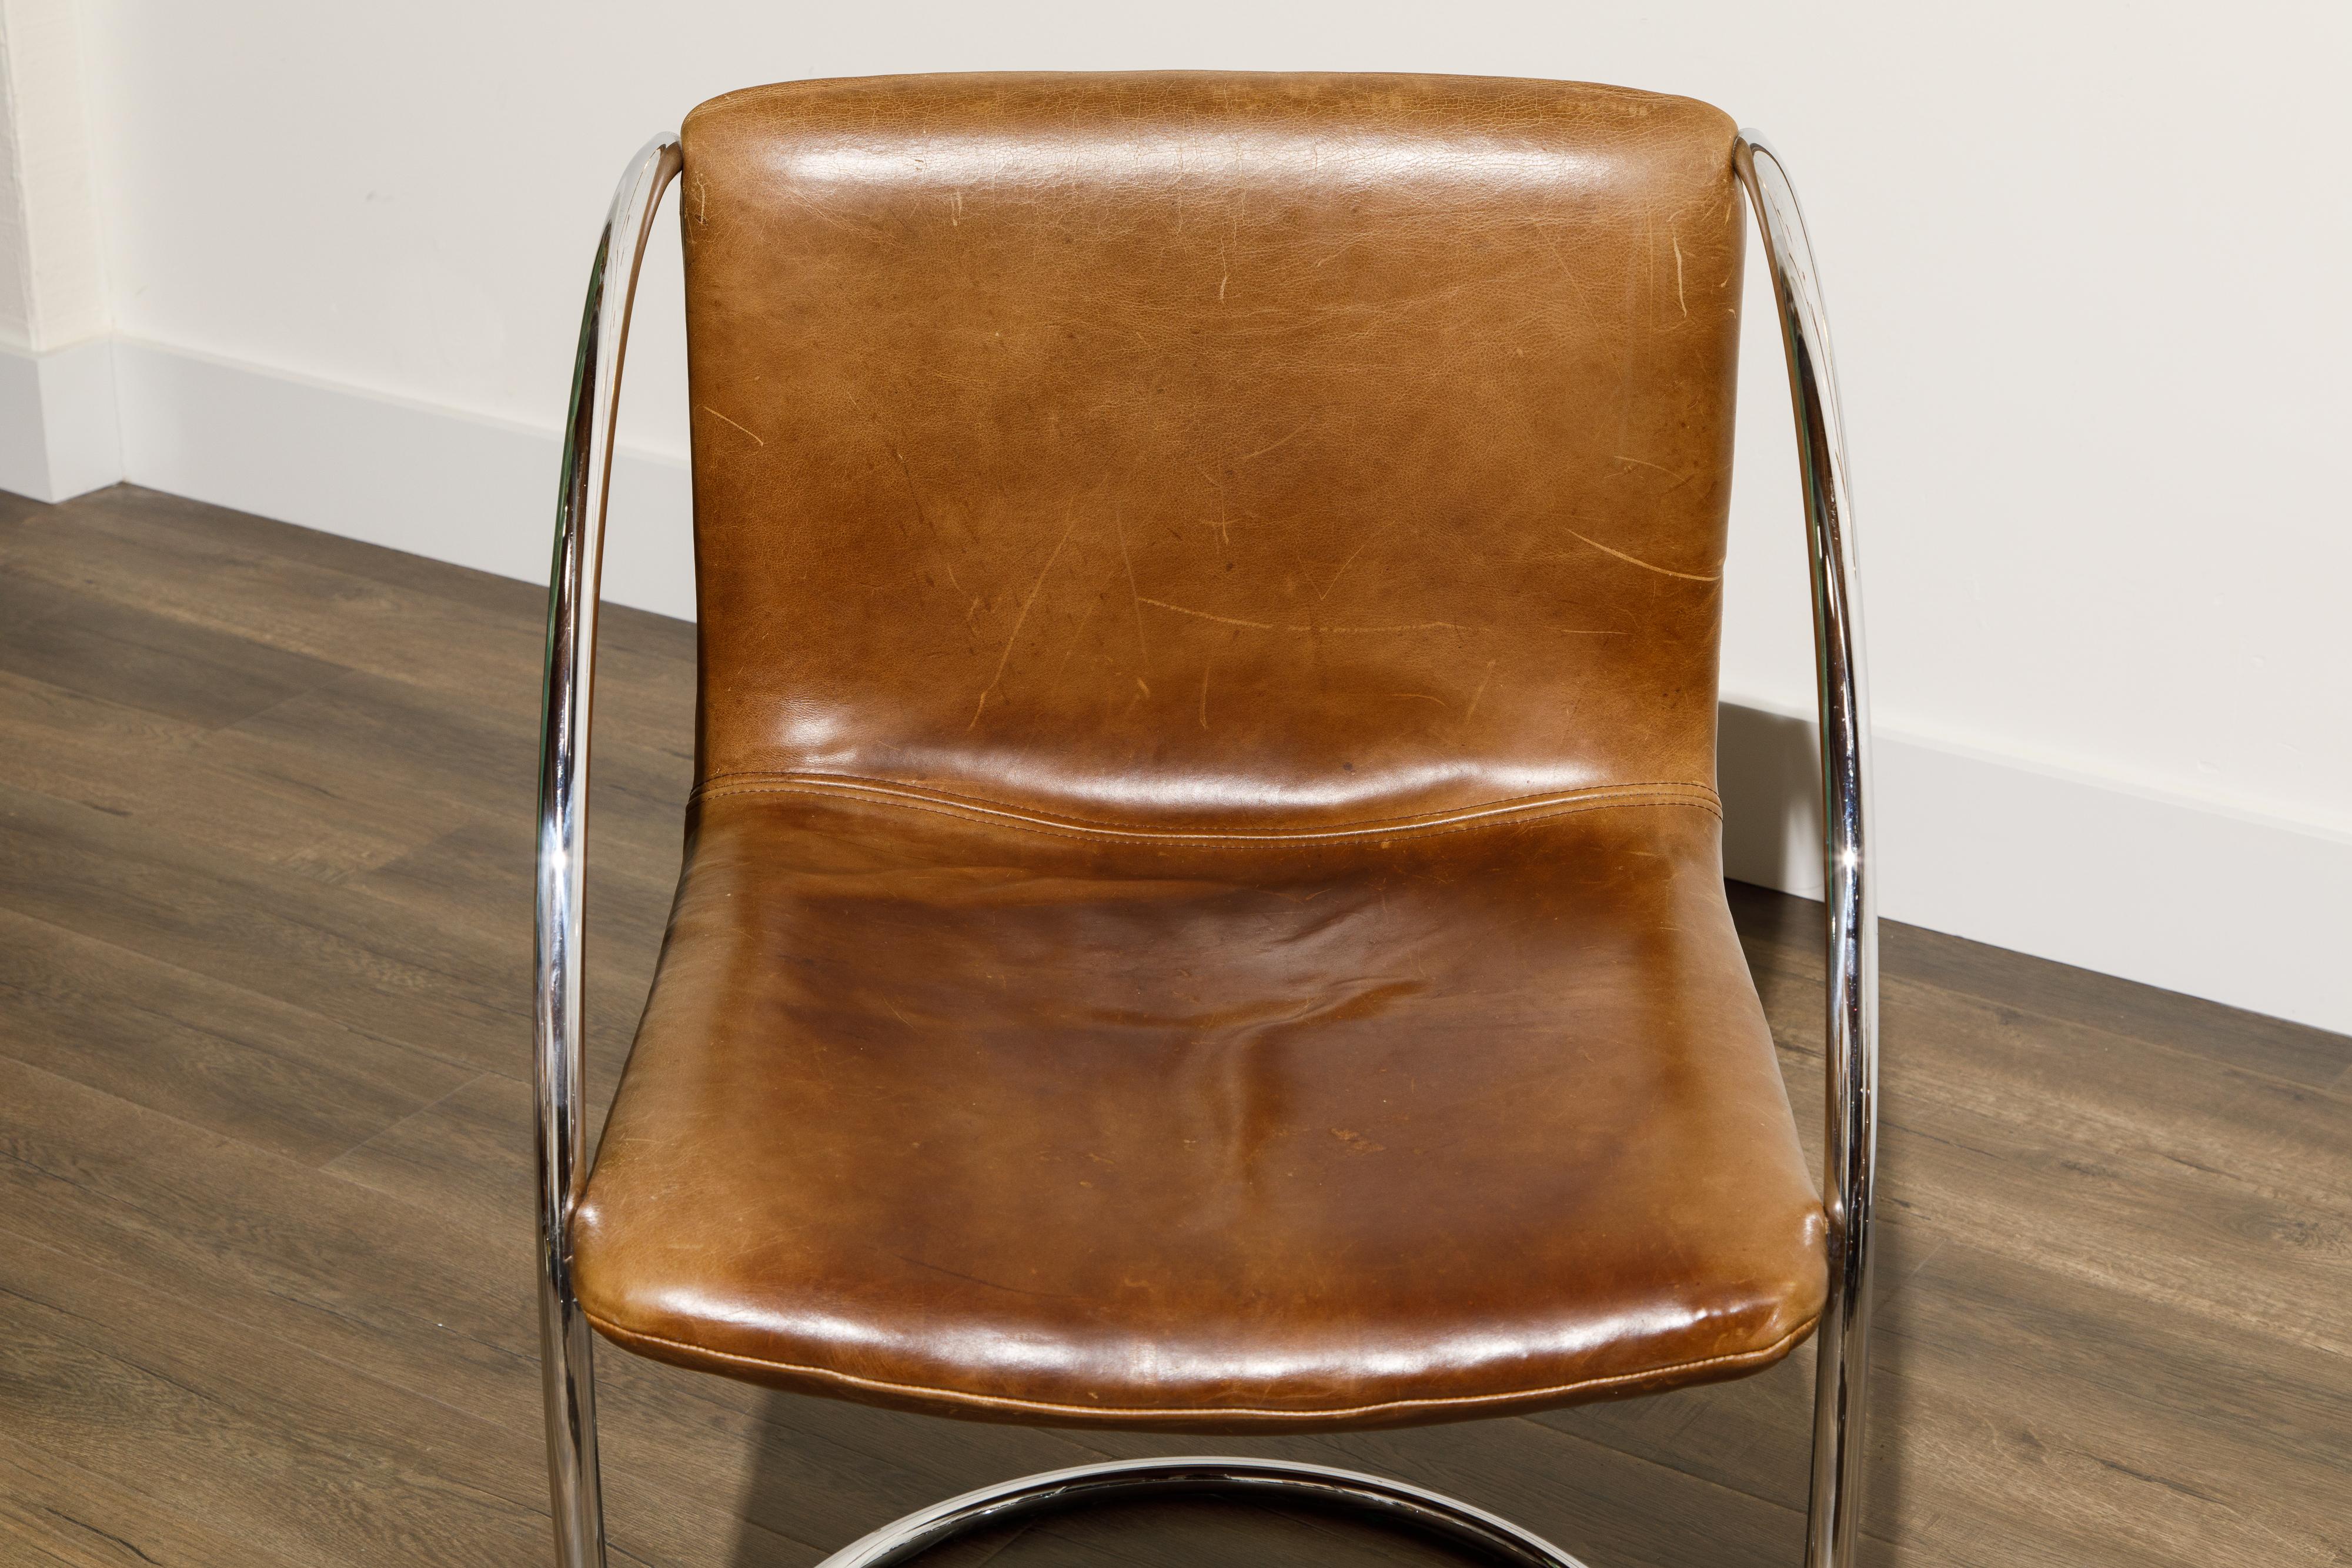 'Lens' Leather Chairs by Giovanni Offredi for Saporiti Italia, c. 1968, Signed 1